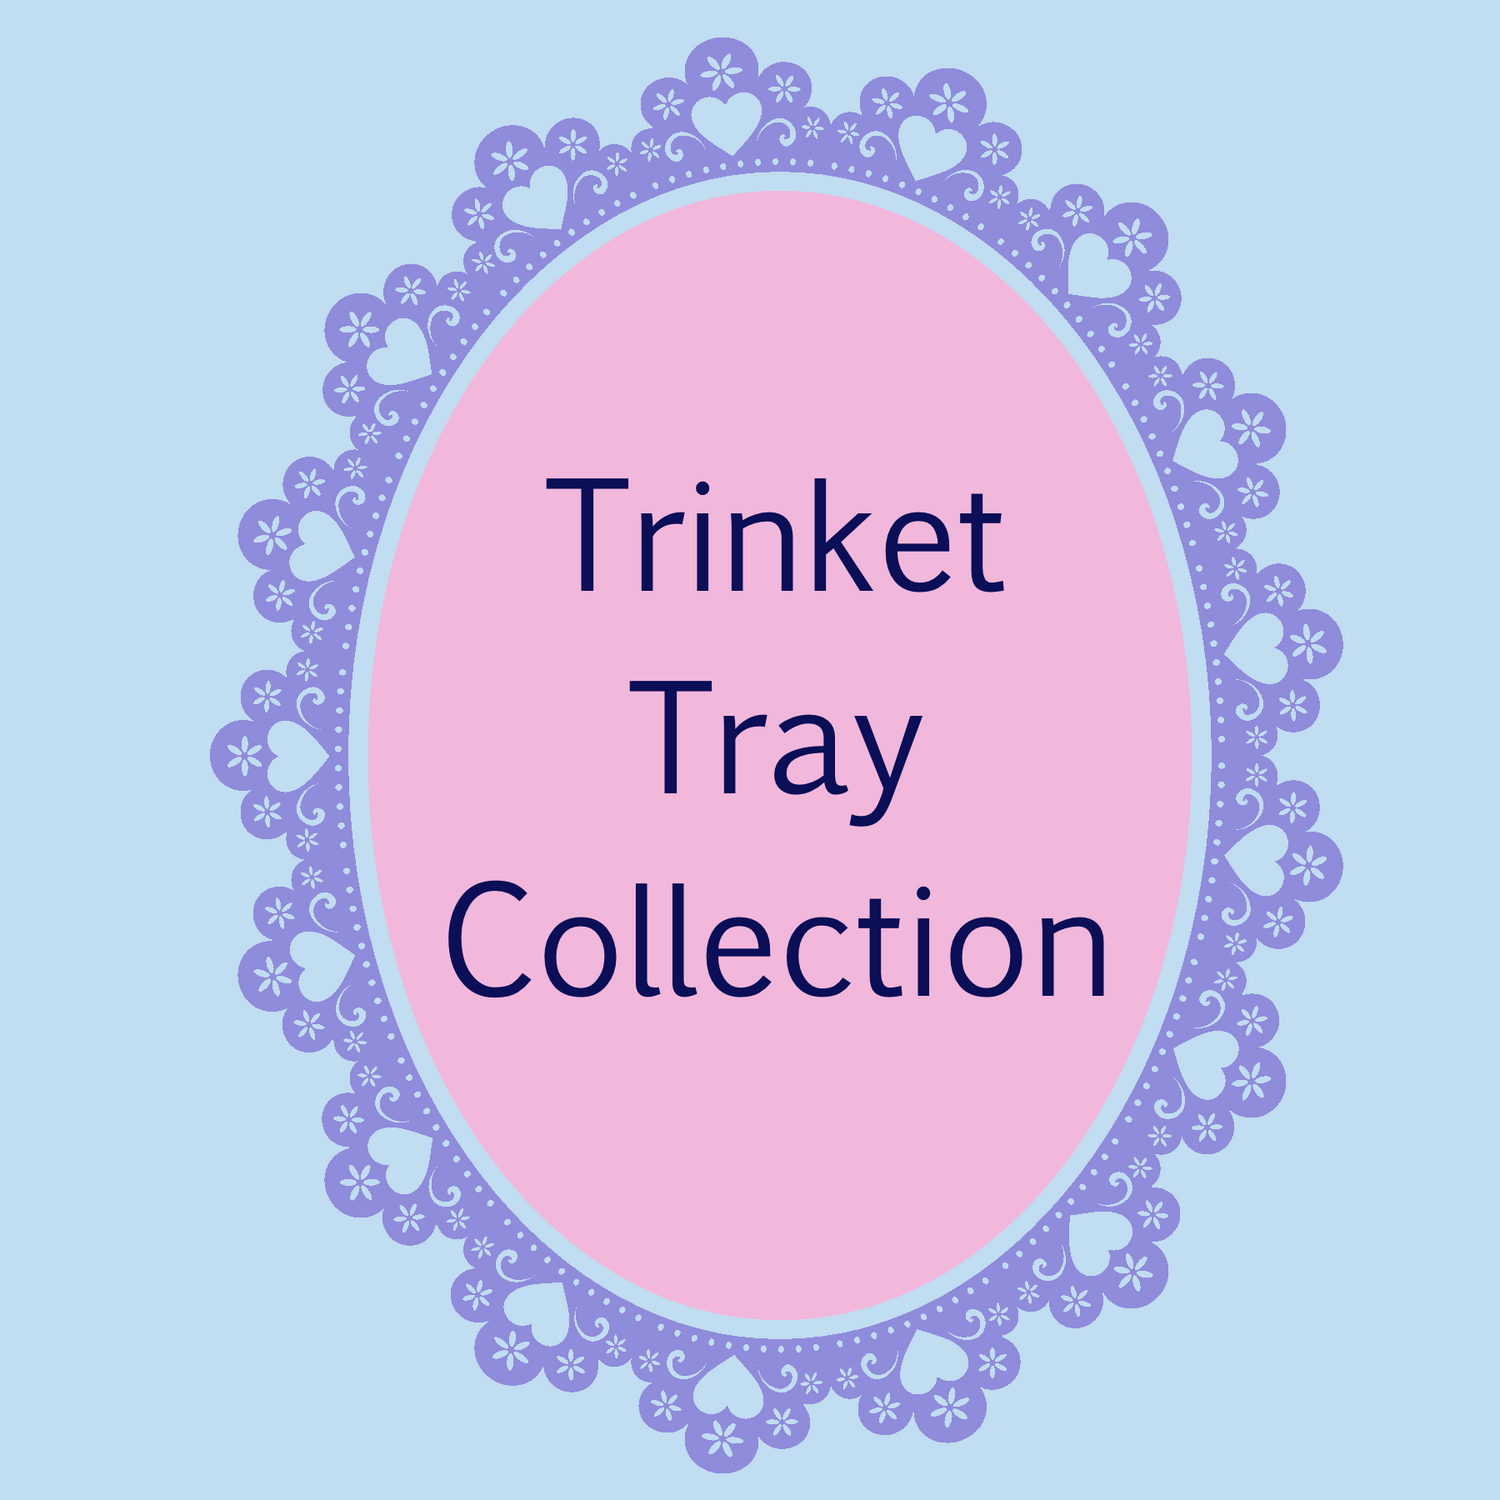 Trinket Tray Collection